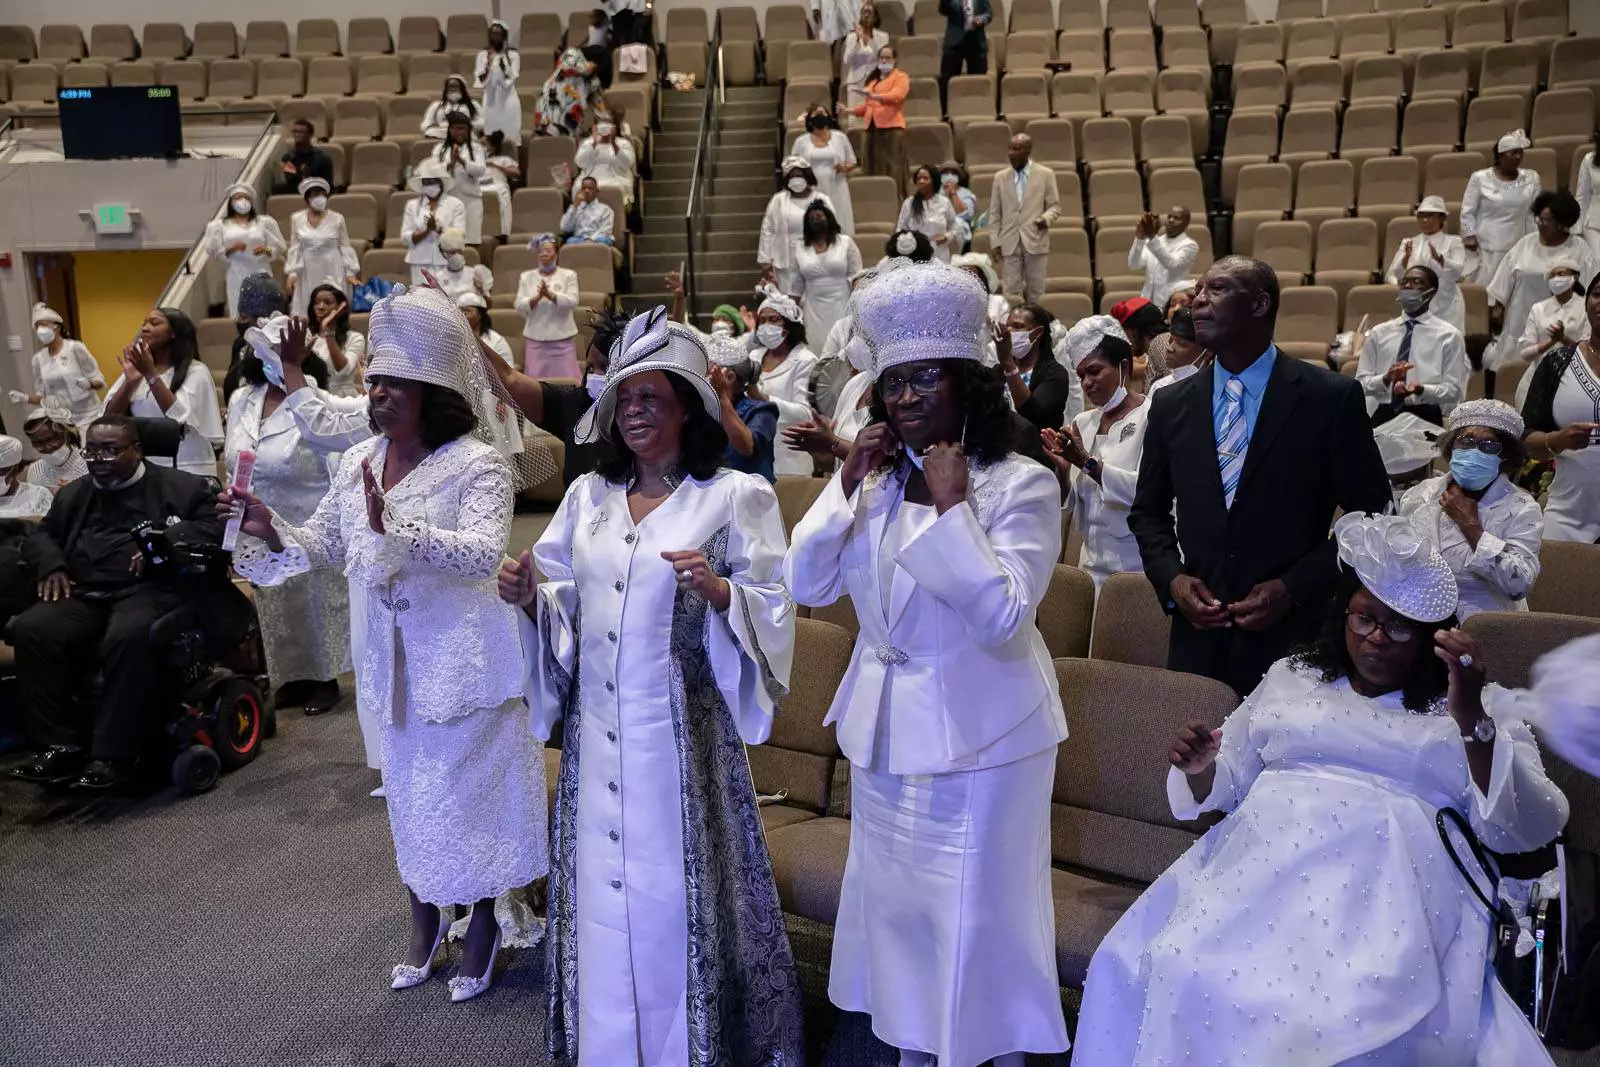 A group of apostolic individuals standing in a church wearing white hats.